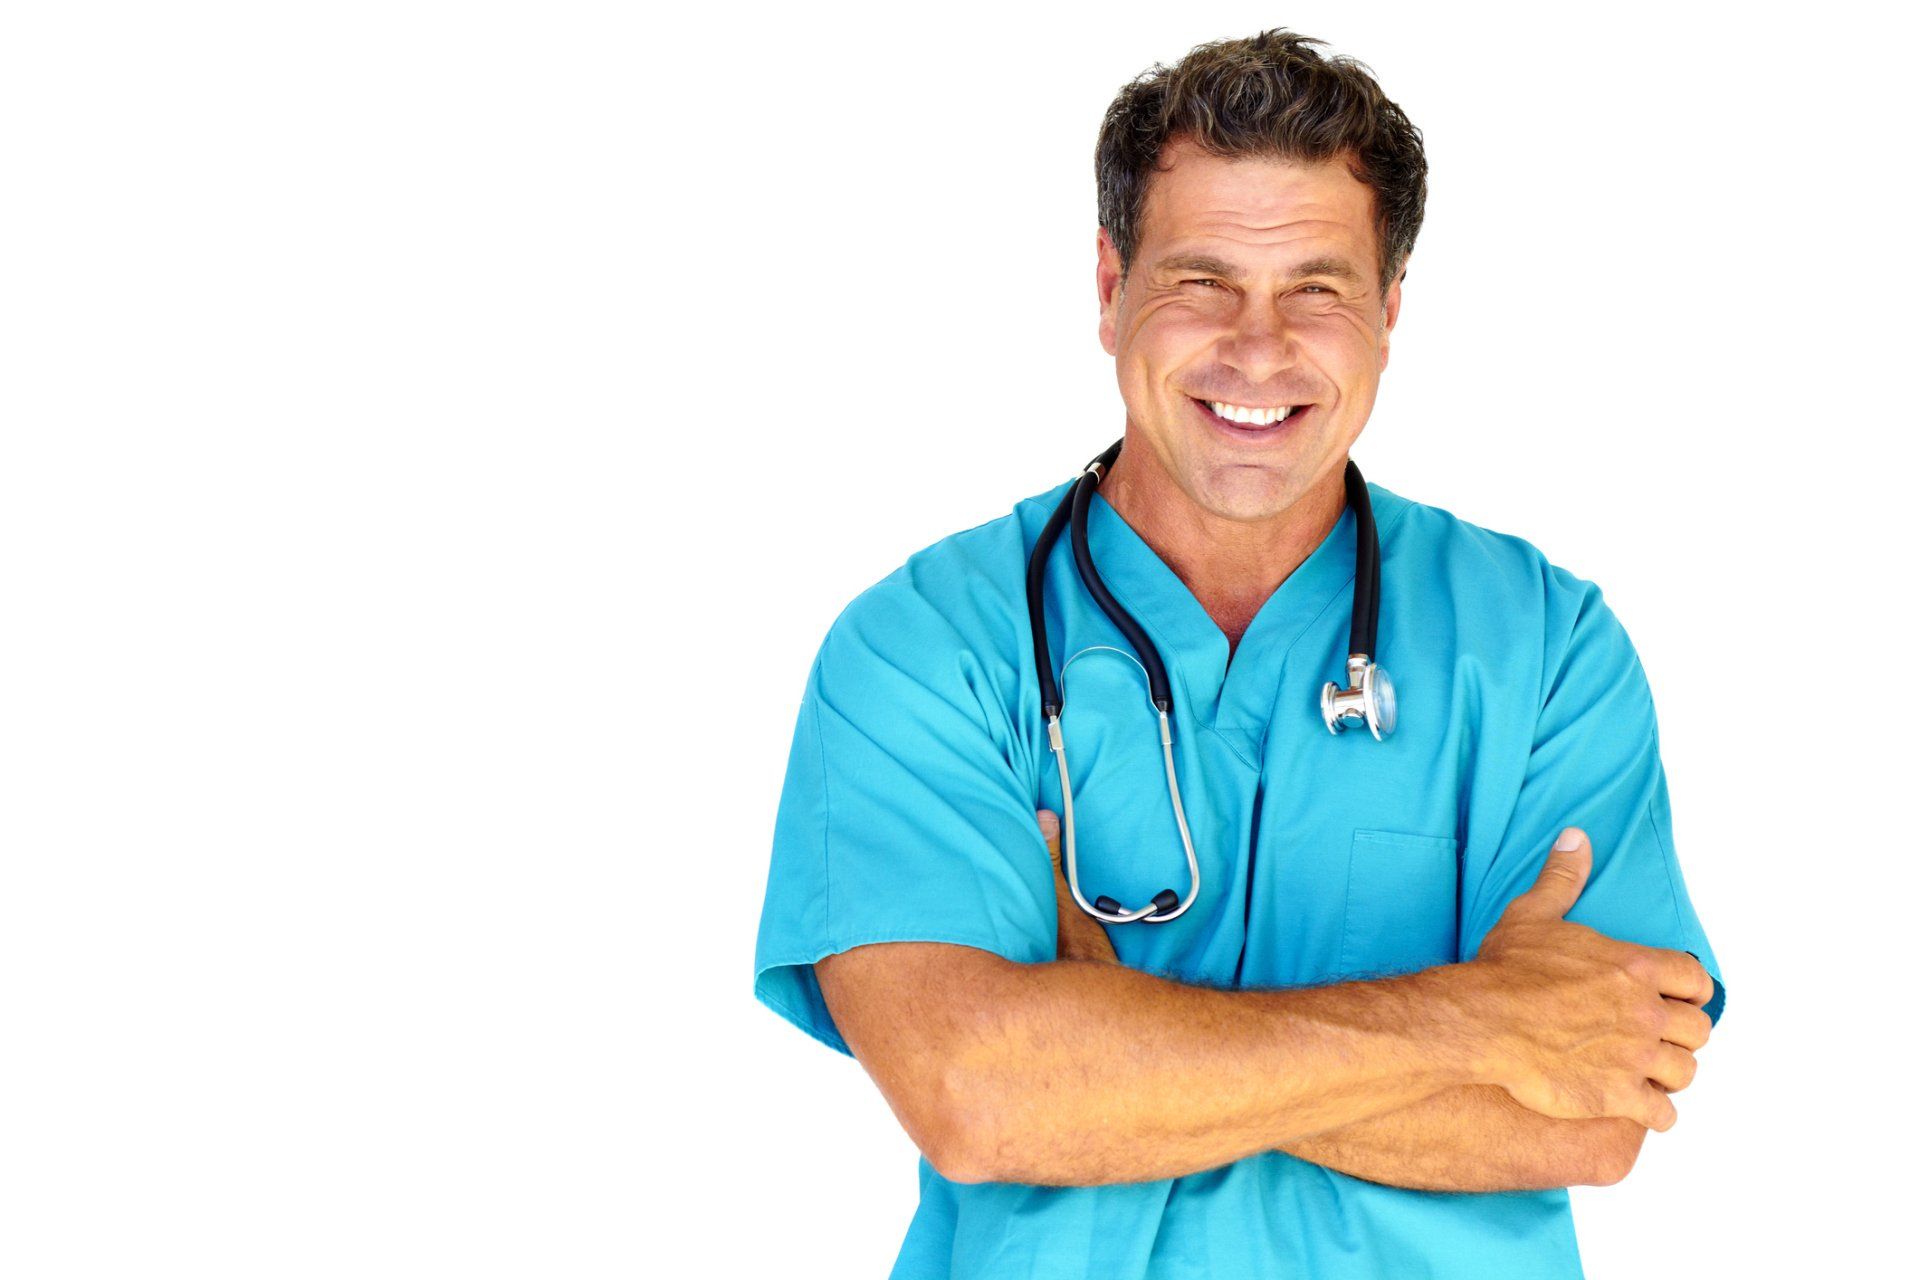 Physical Therapy — Male Healthcare Worker in Richmond, VA